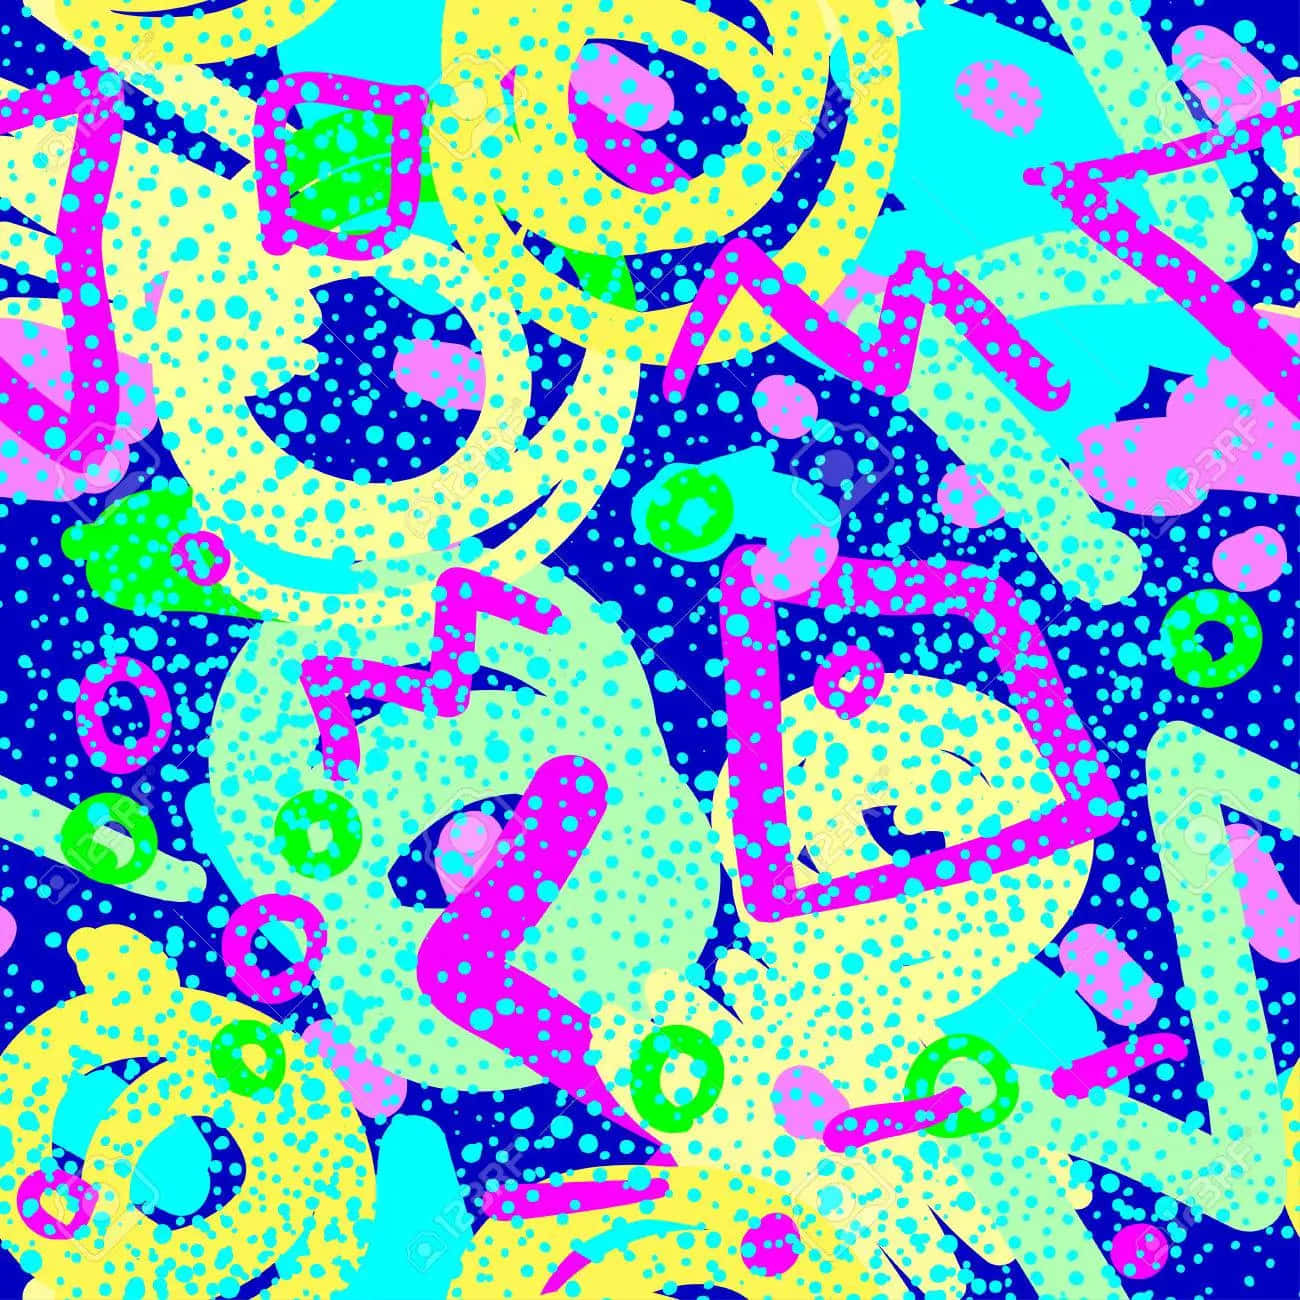 90s Style In Pink, Blue, And Green Wallpaper